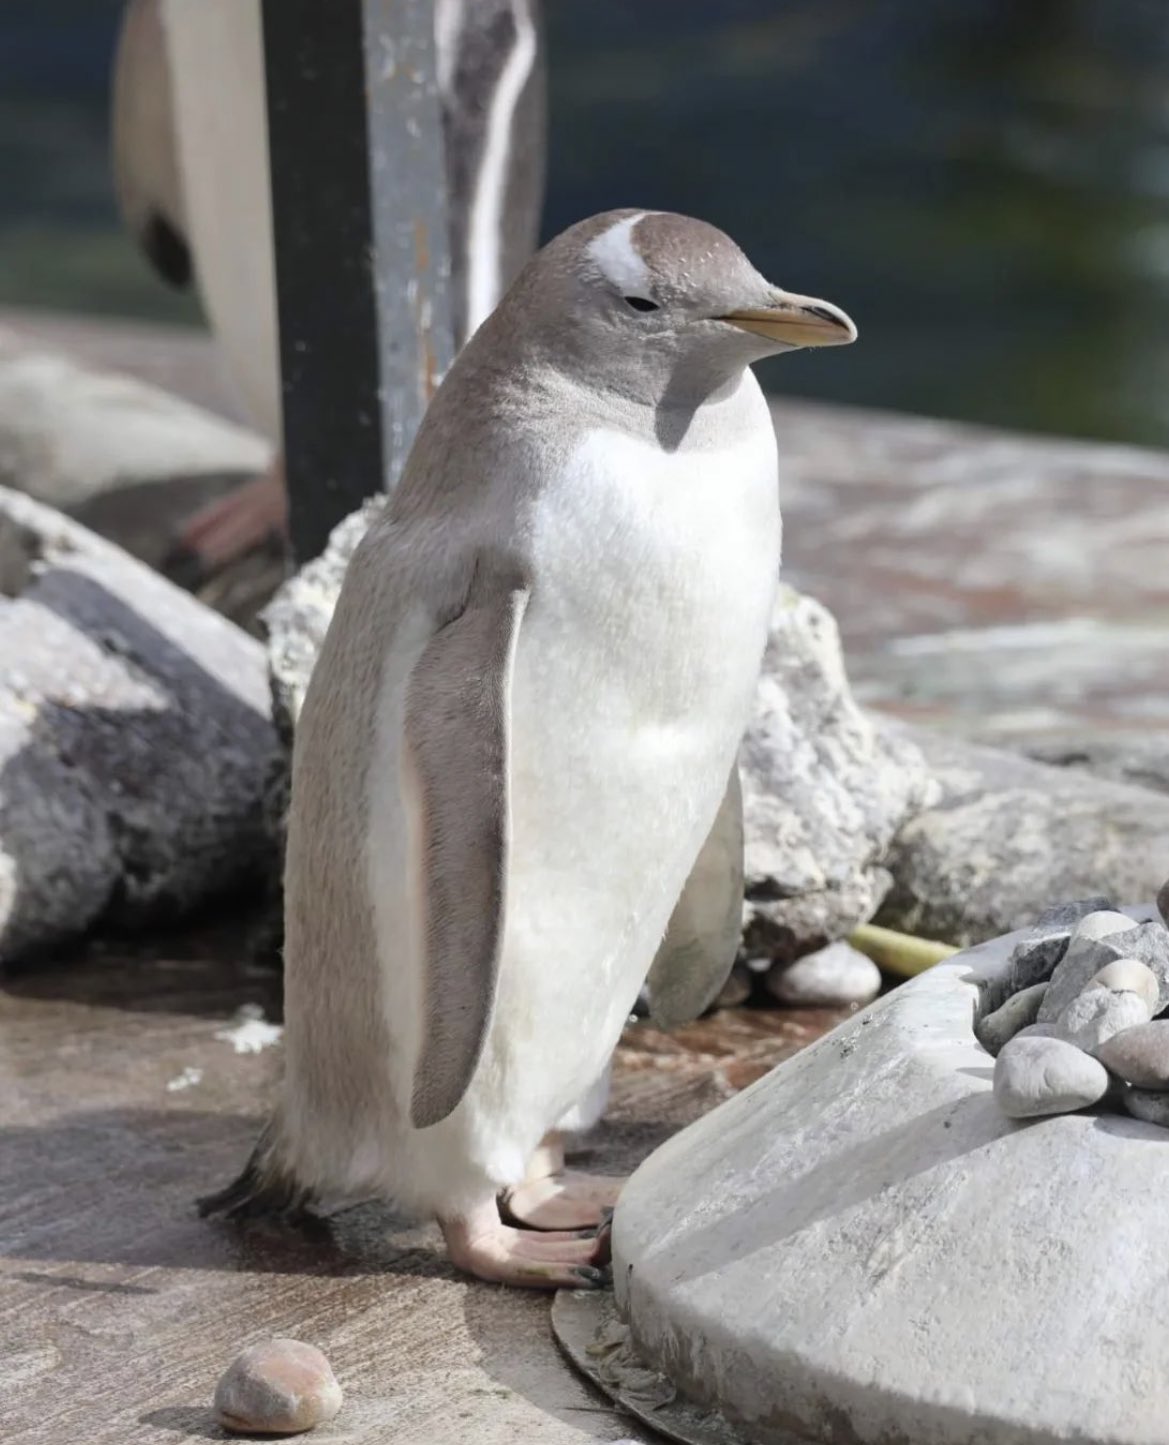 Snowflake gentoo penguin looking to right in front of nest ring